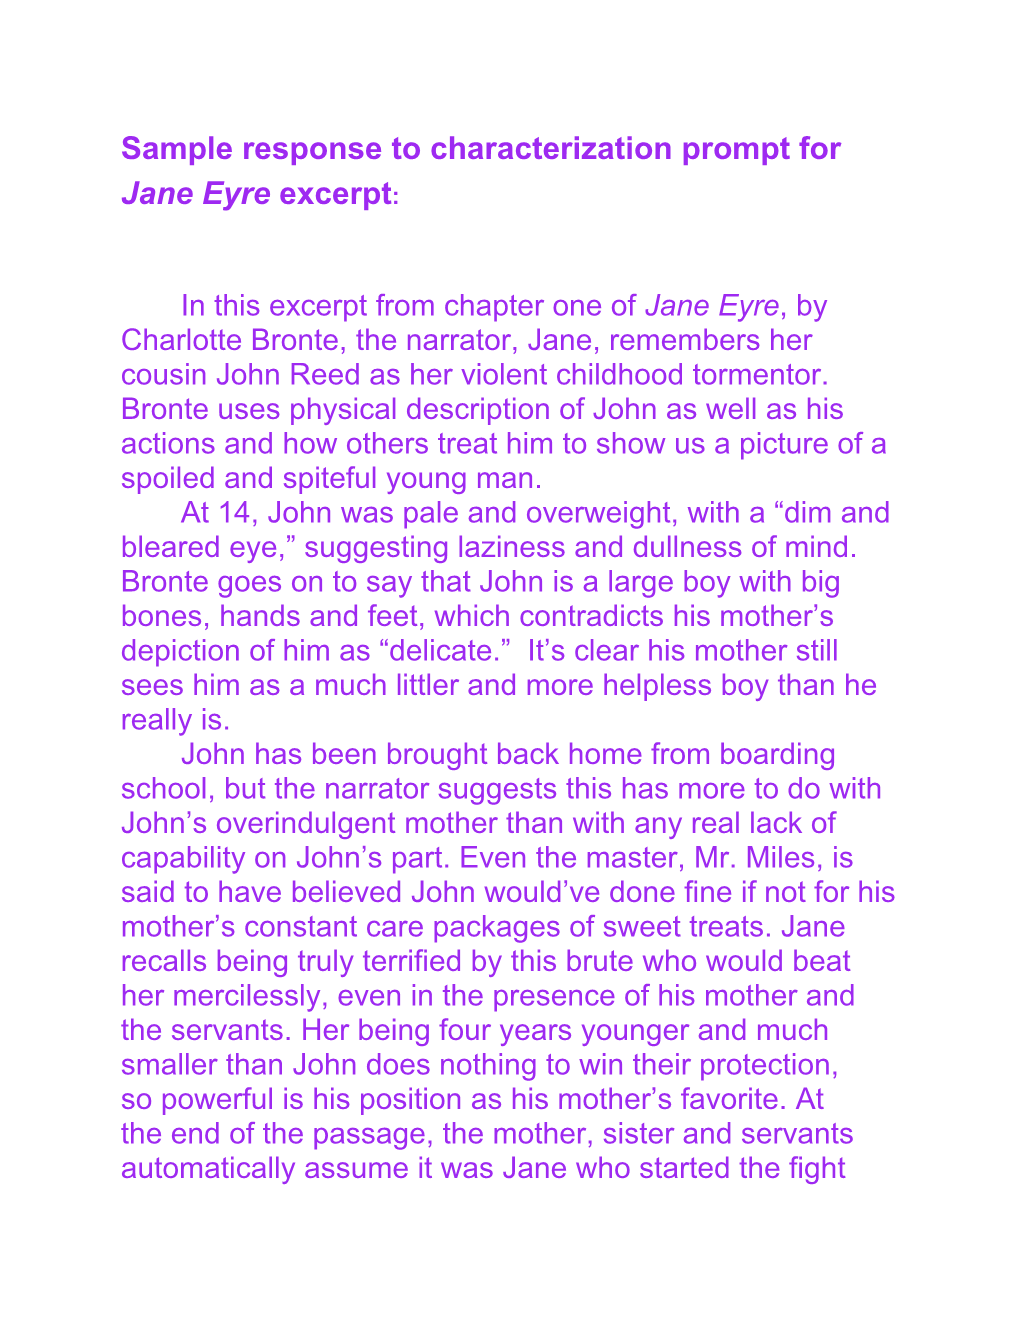 Sample Response to Characterization Prompt for Jane Eyre Excerpt